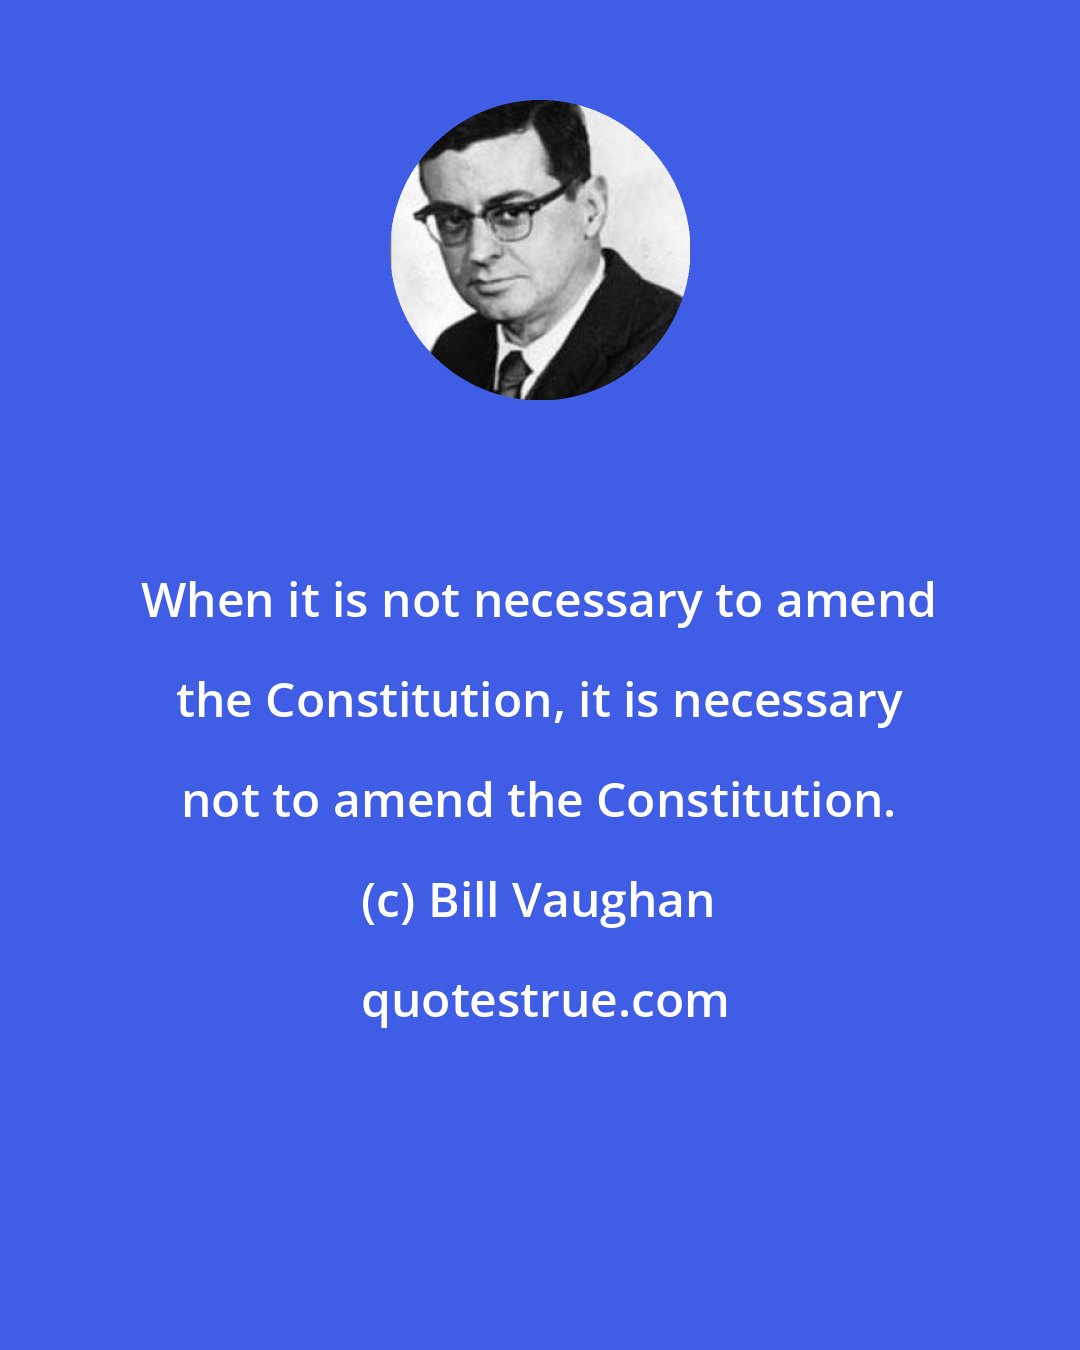 Bill Vaughan: When it is not necessary to amend the Constitution, it is necessary not to amend the Constitution.